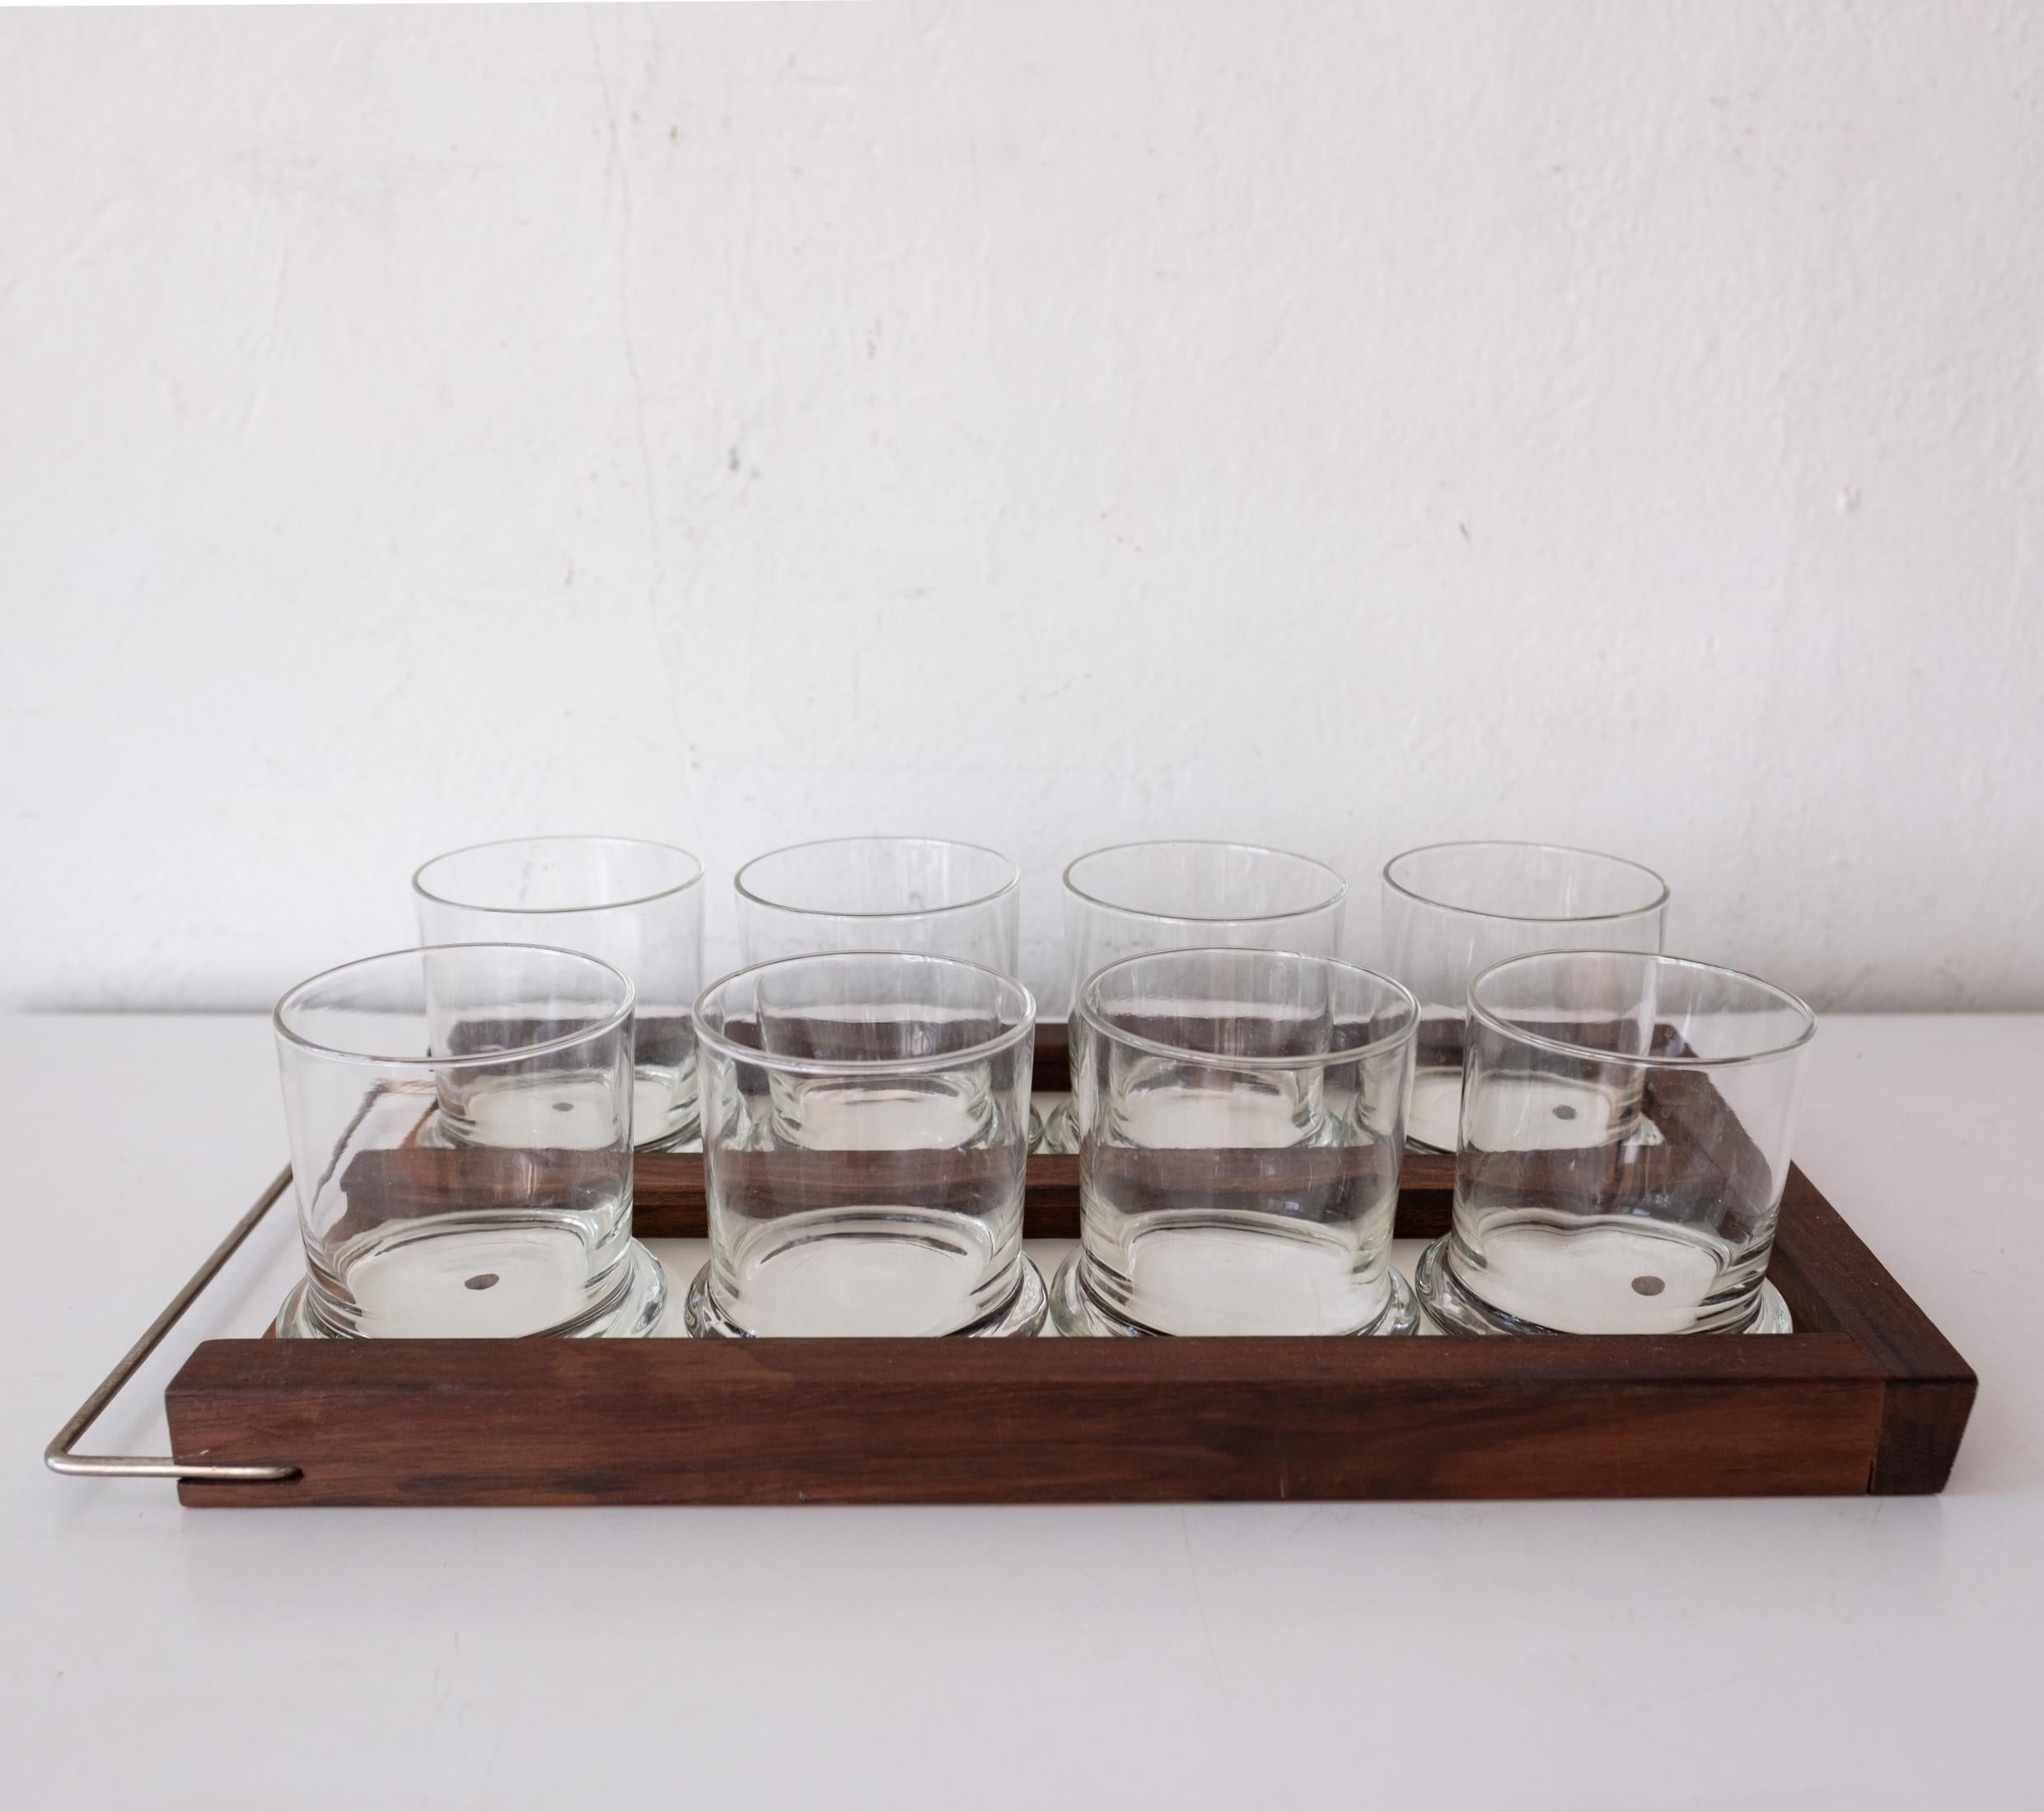 Walnut and Brass Wall Mounted Tray and Glasses In Good Condition For Sale In San Diego, CA